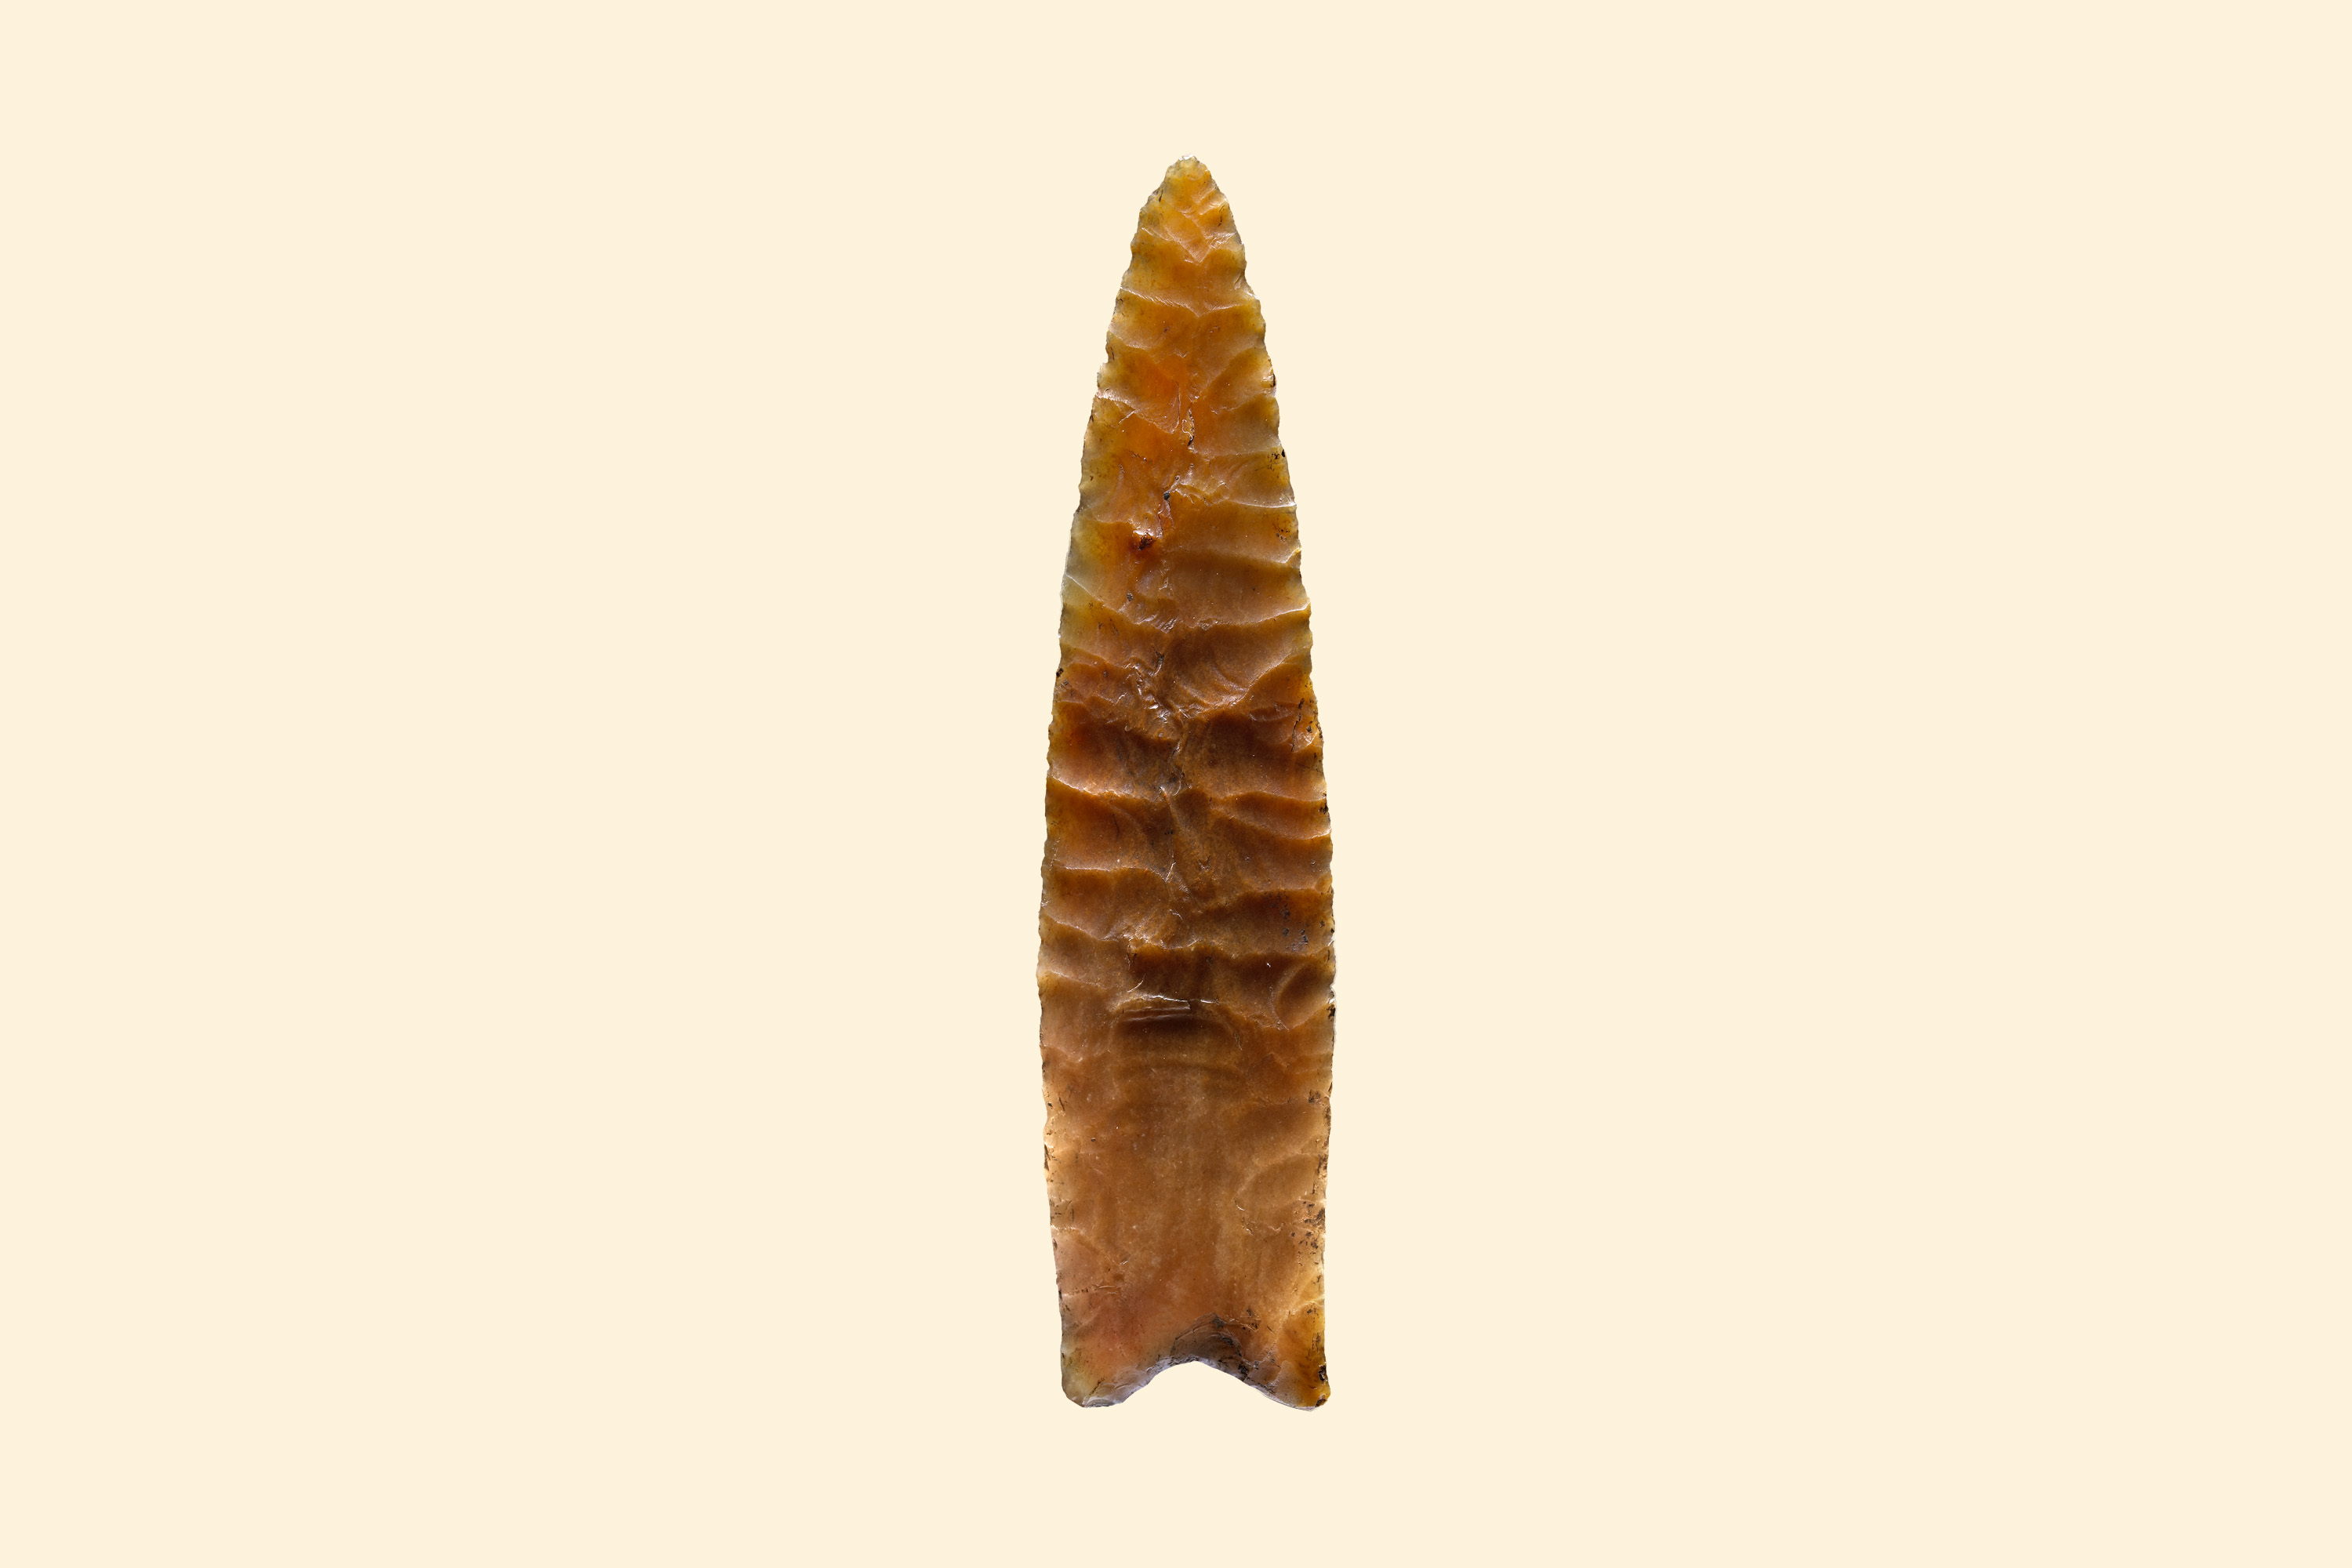 The Clovis people were Ice Age hunter-gatherers who relied on expertly crafted spear points like this one for a successful hunt.